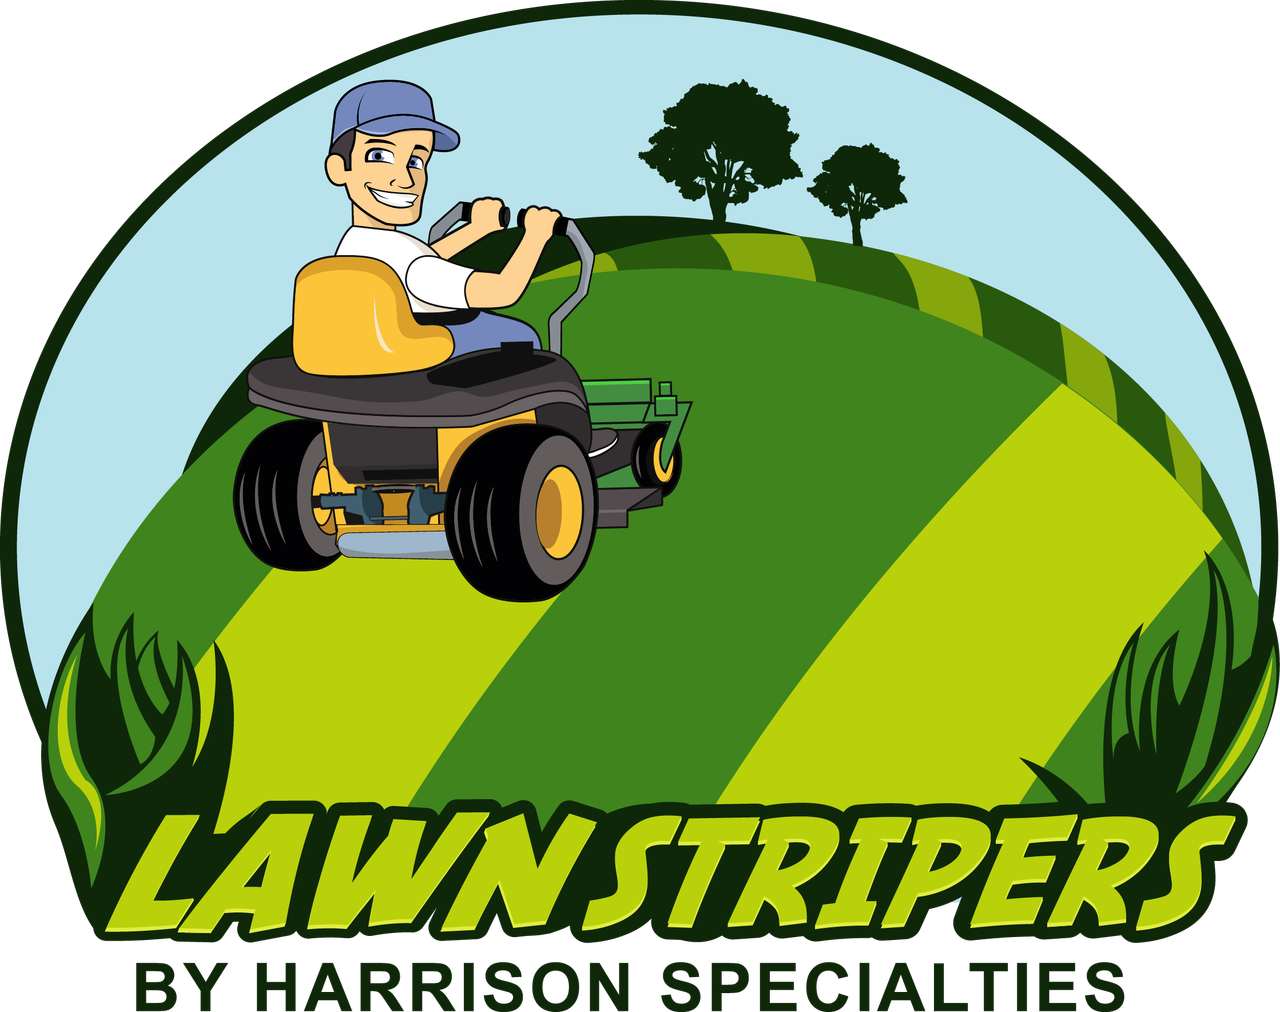 Lawn Roller Striping Kit for 2017 John Deere 760 with 60" 7-Iron deck